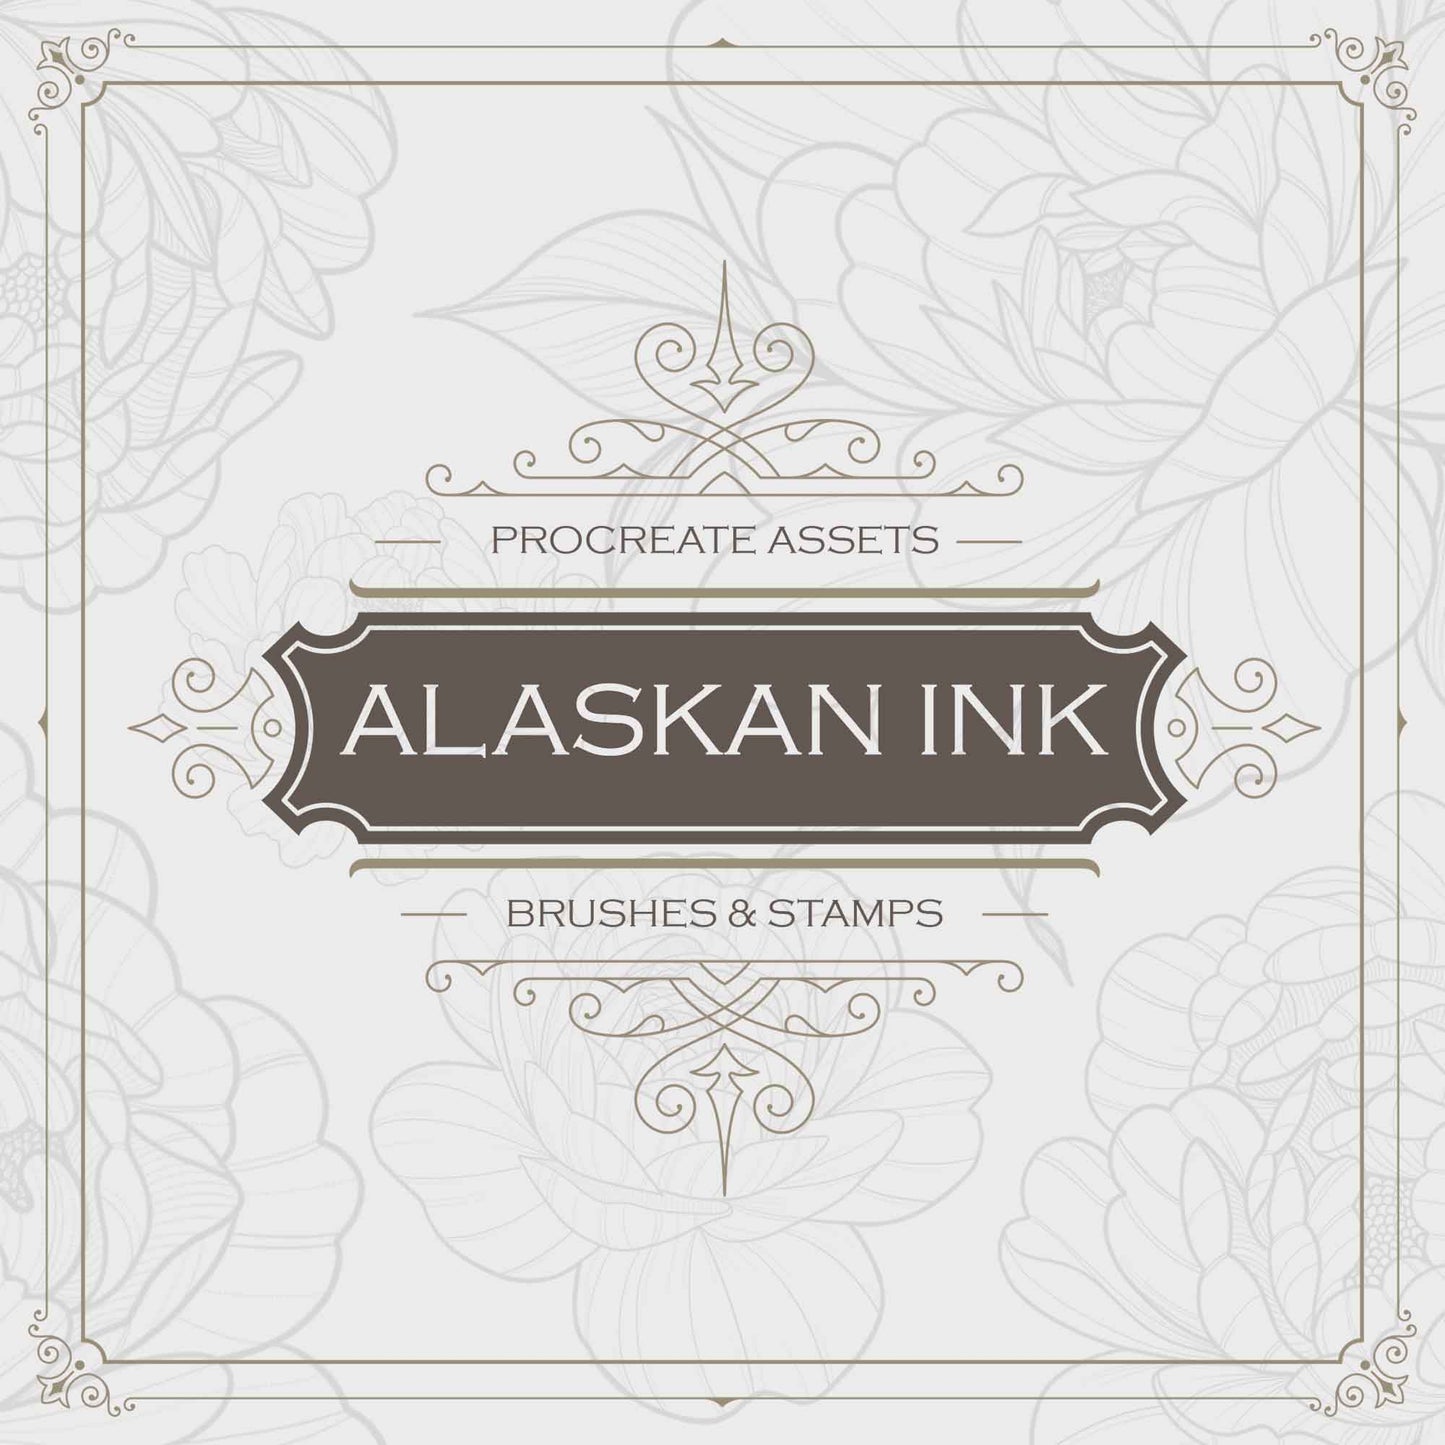 40 Animal Skulls Tattoo Brushes & Stamps for Procreate application created by Alaskan ink